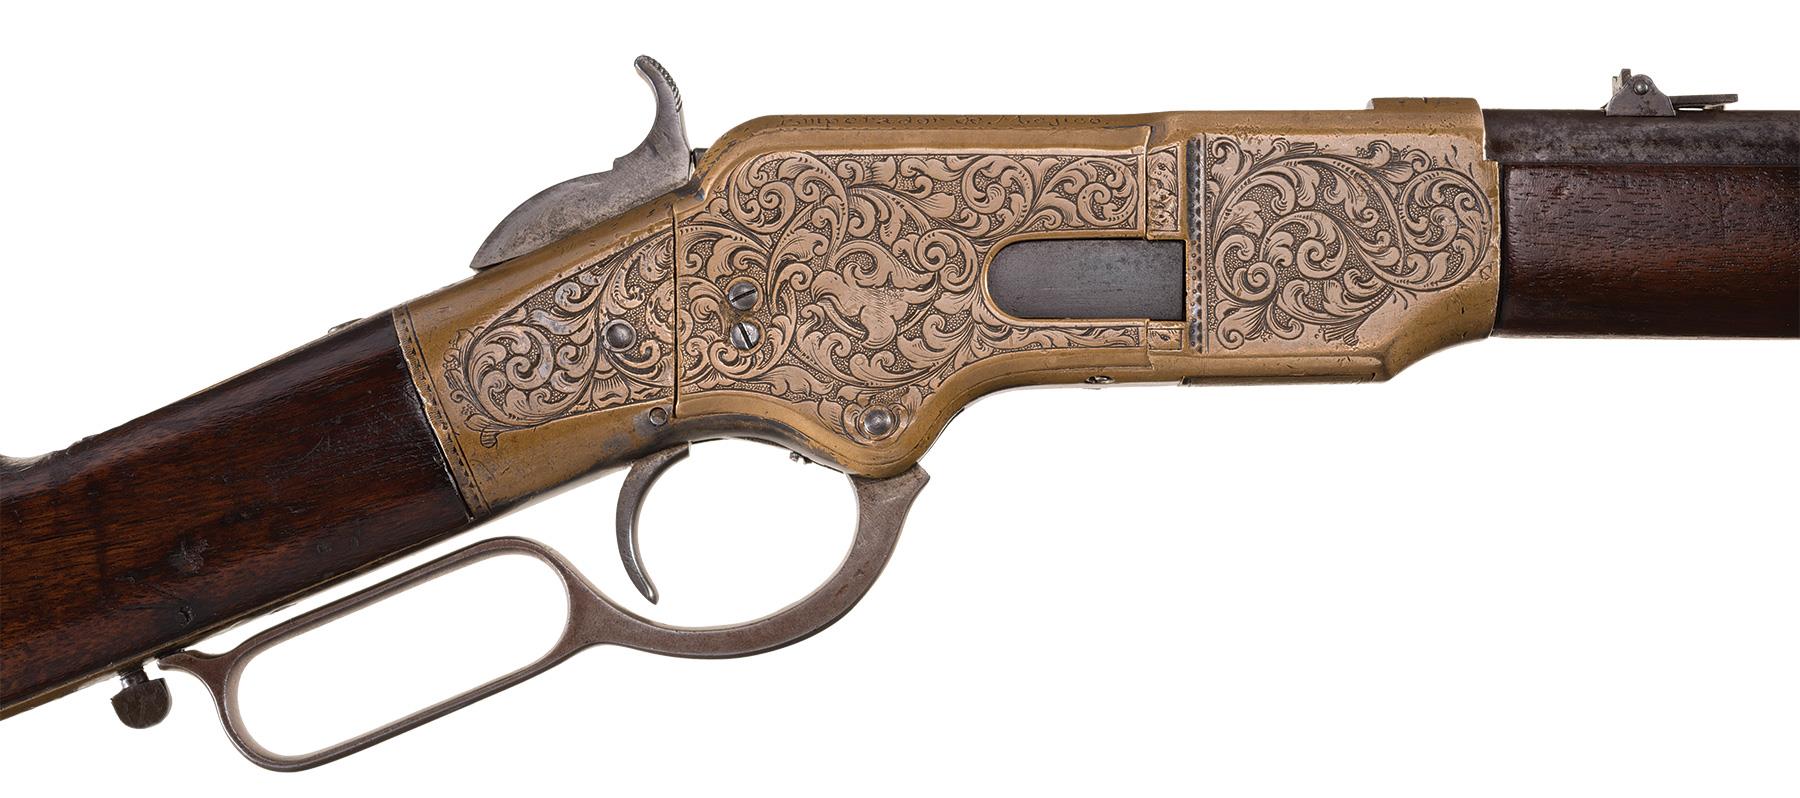 Winchester year made serial number